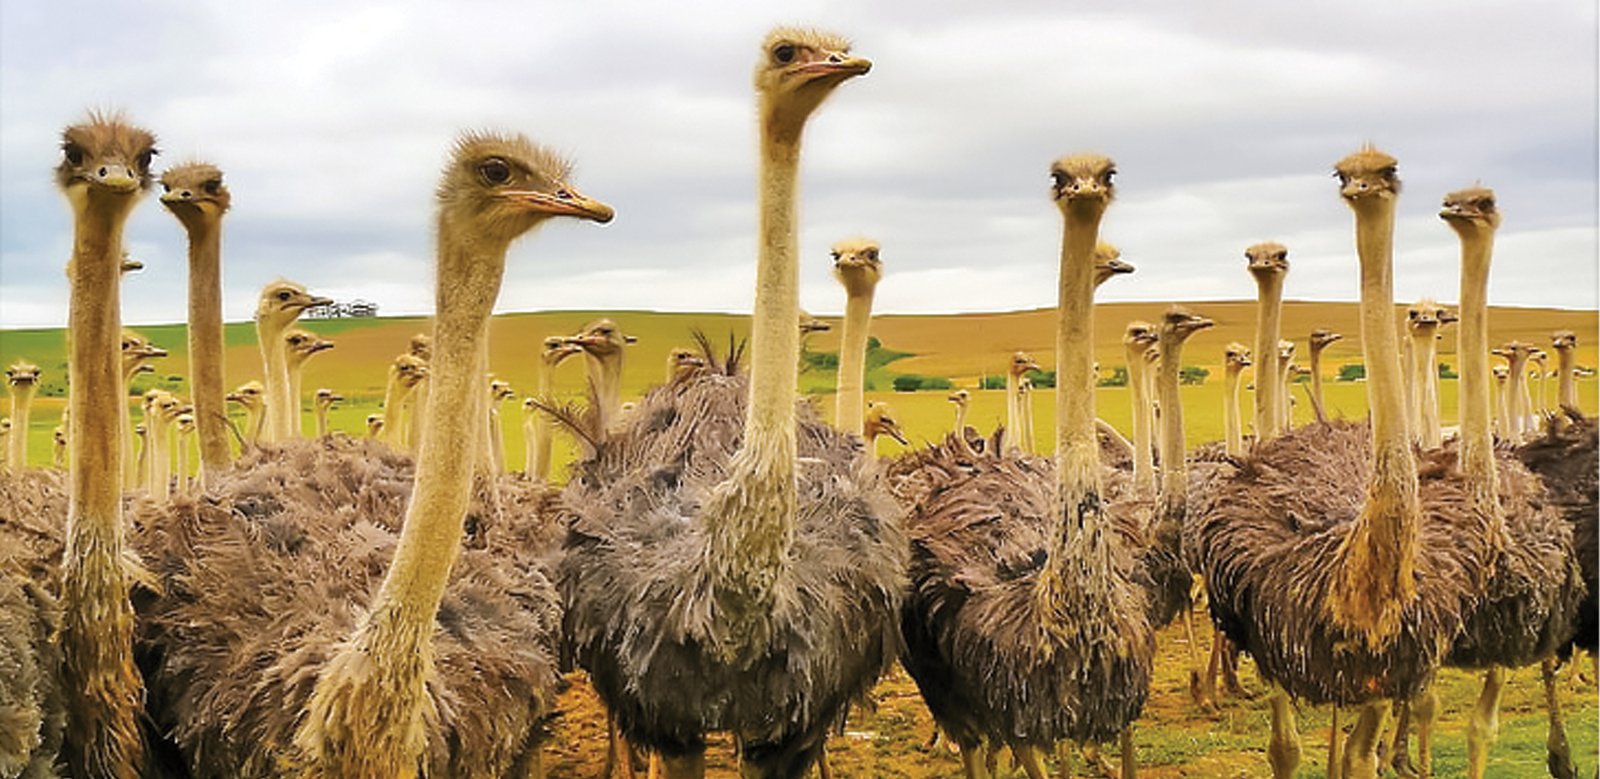 Image to display Ostrich herd..